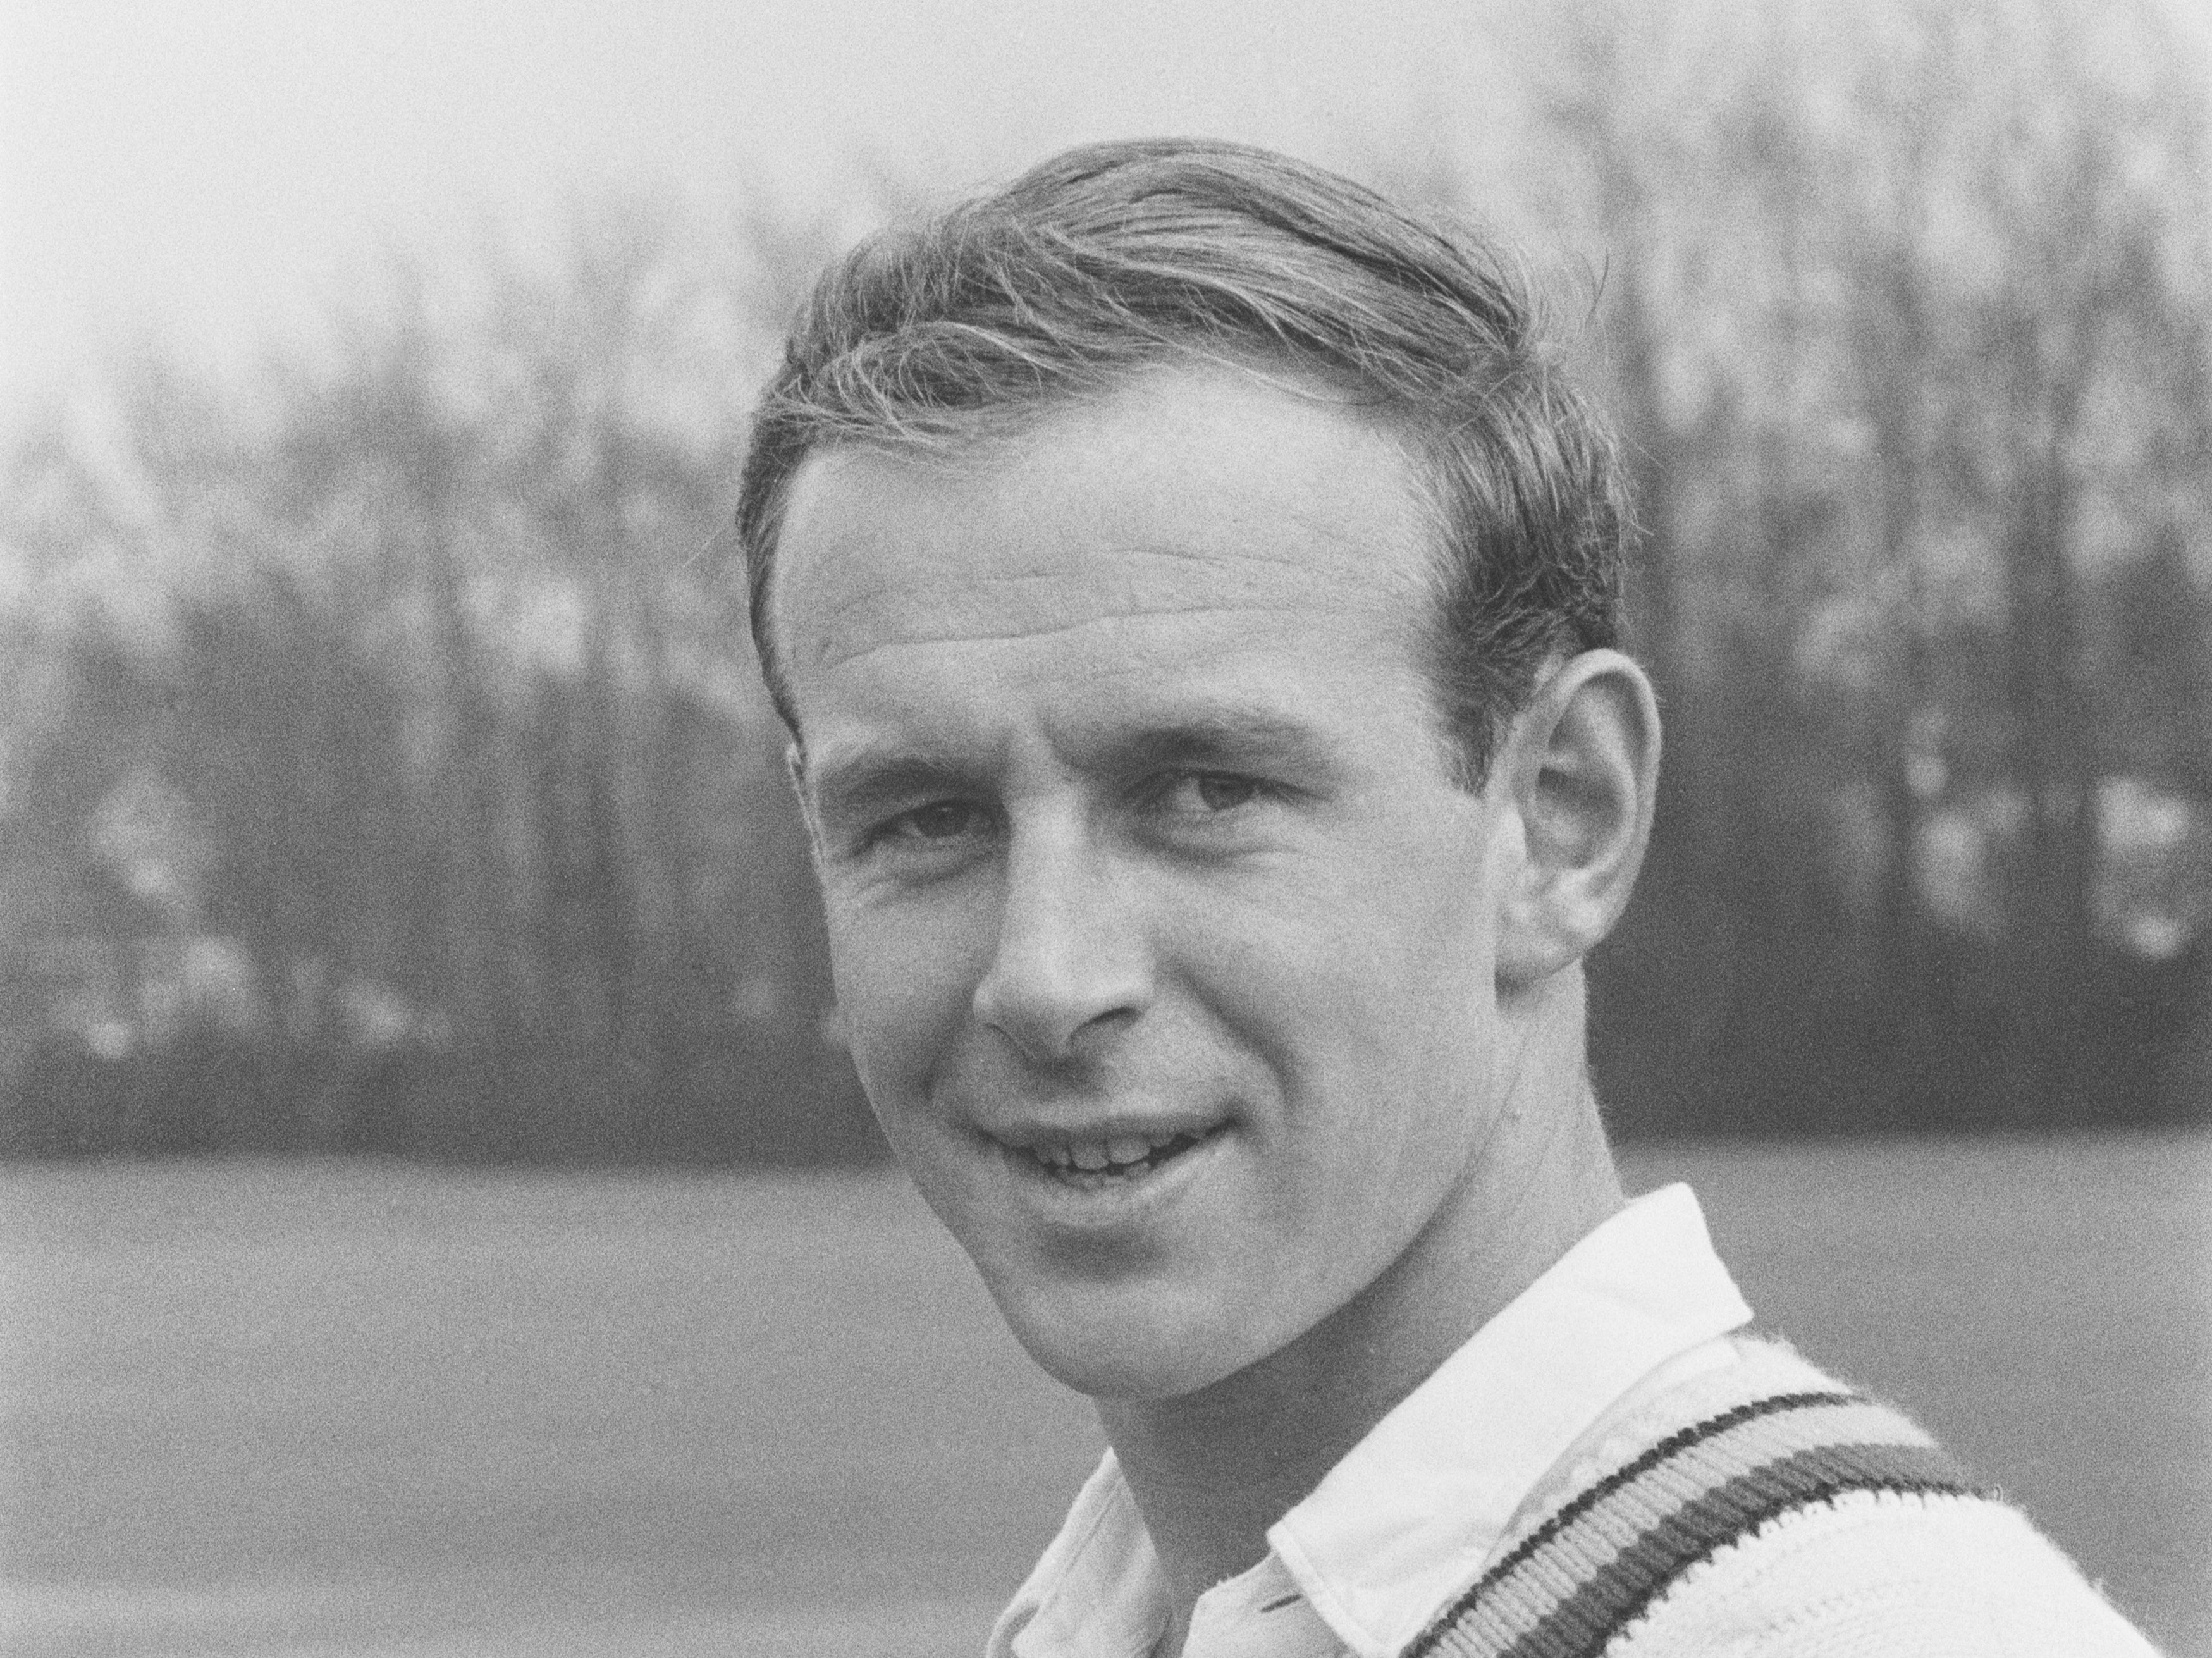 Derek Underwood, England’s greatest-ever spin bowler, has died at 78